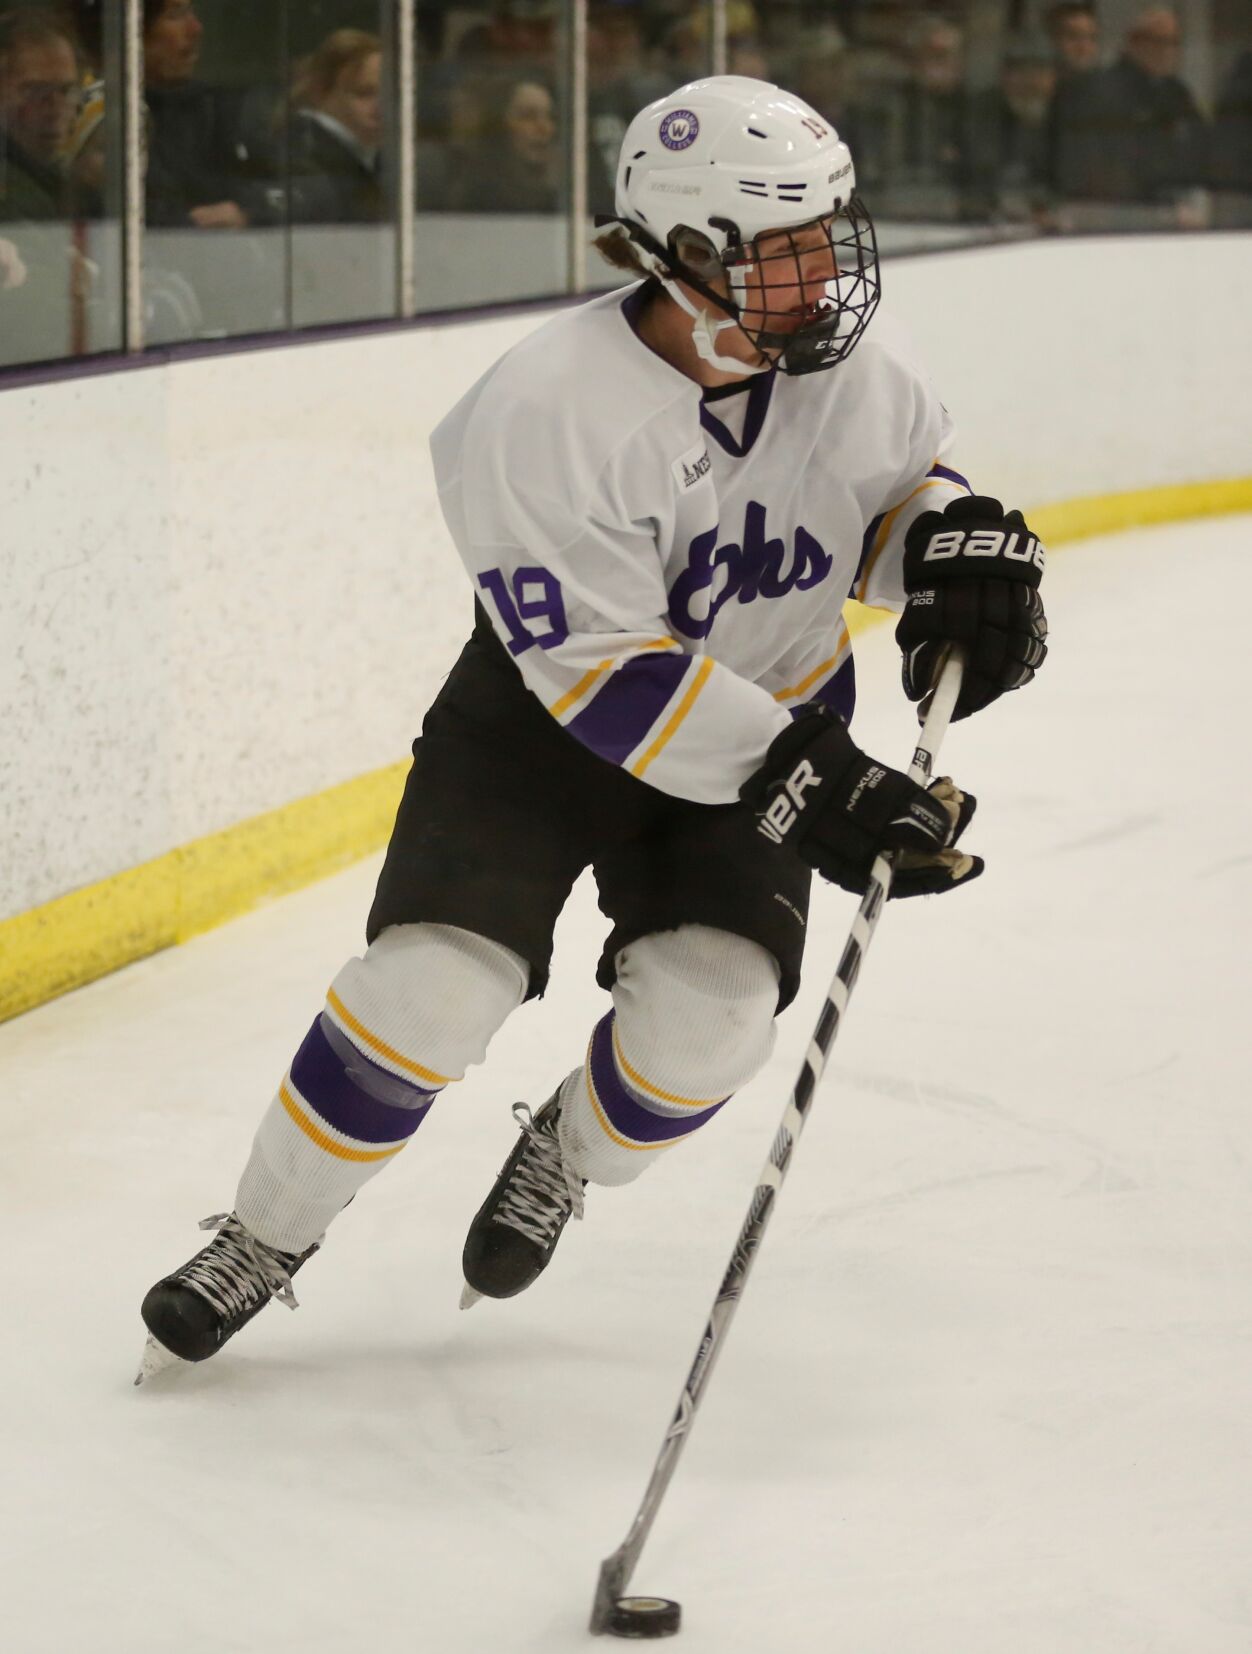 Williams College men's ice hockey coach Kangas planning ahead during